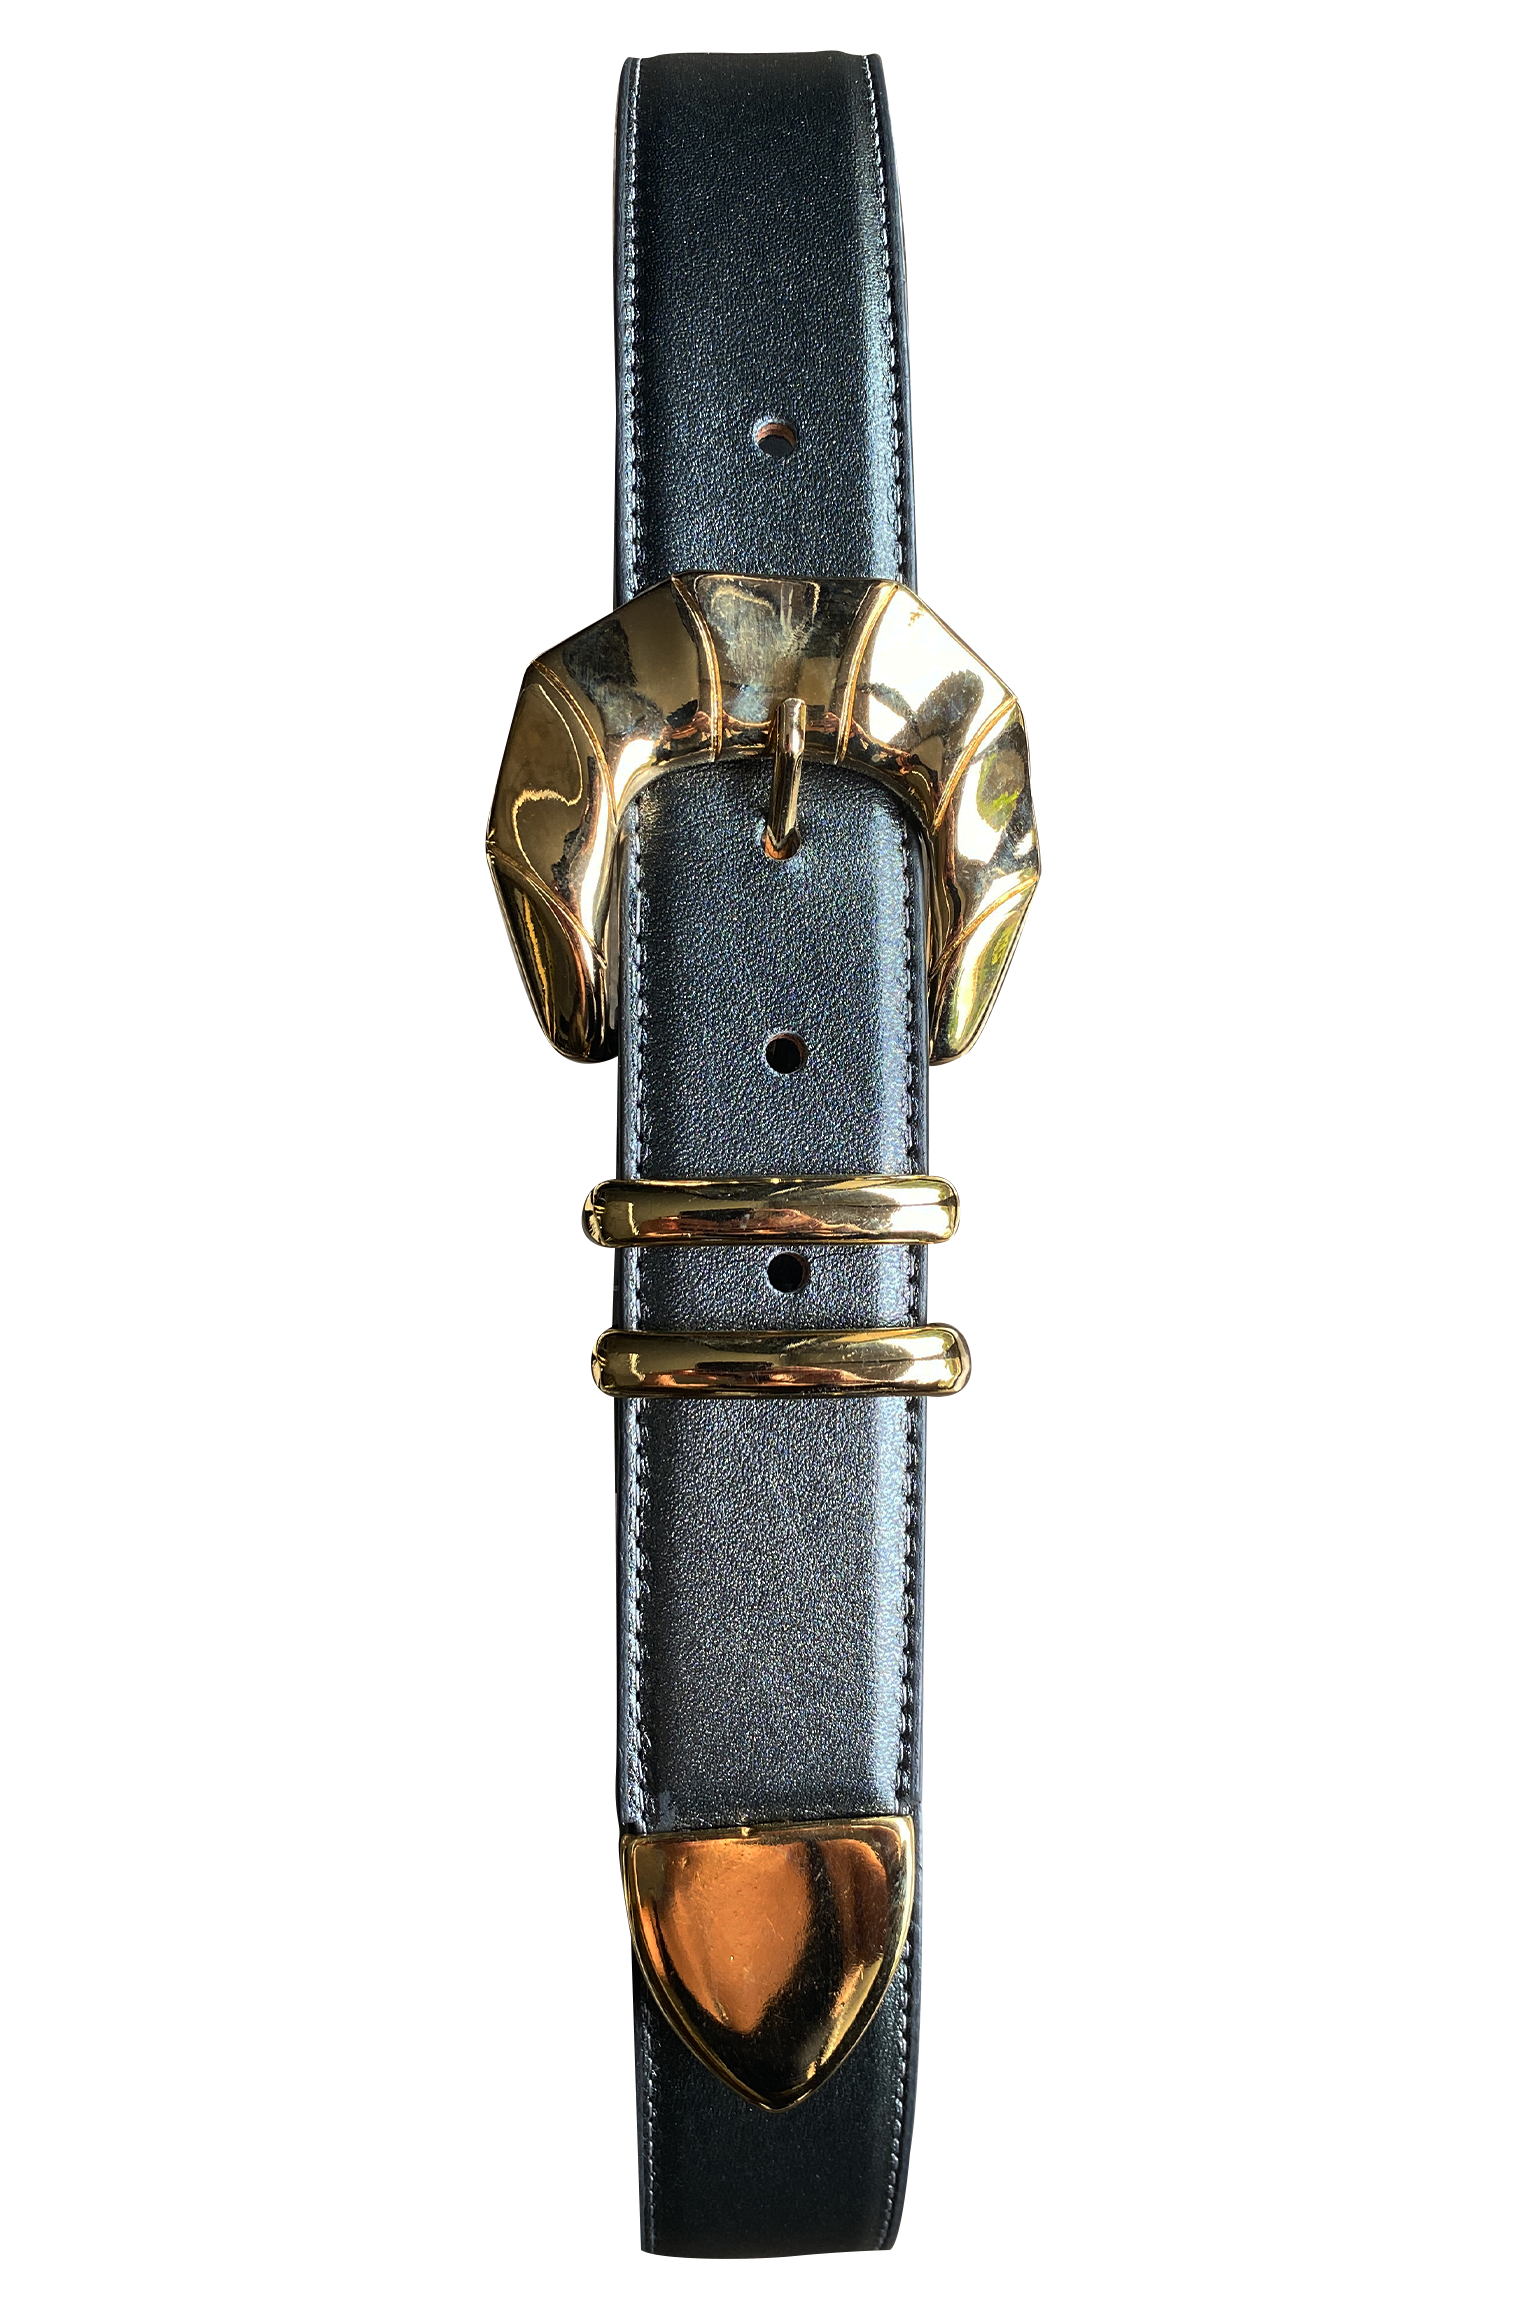 The Victorian belt oxford gold